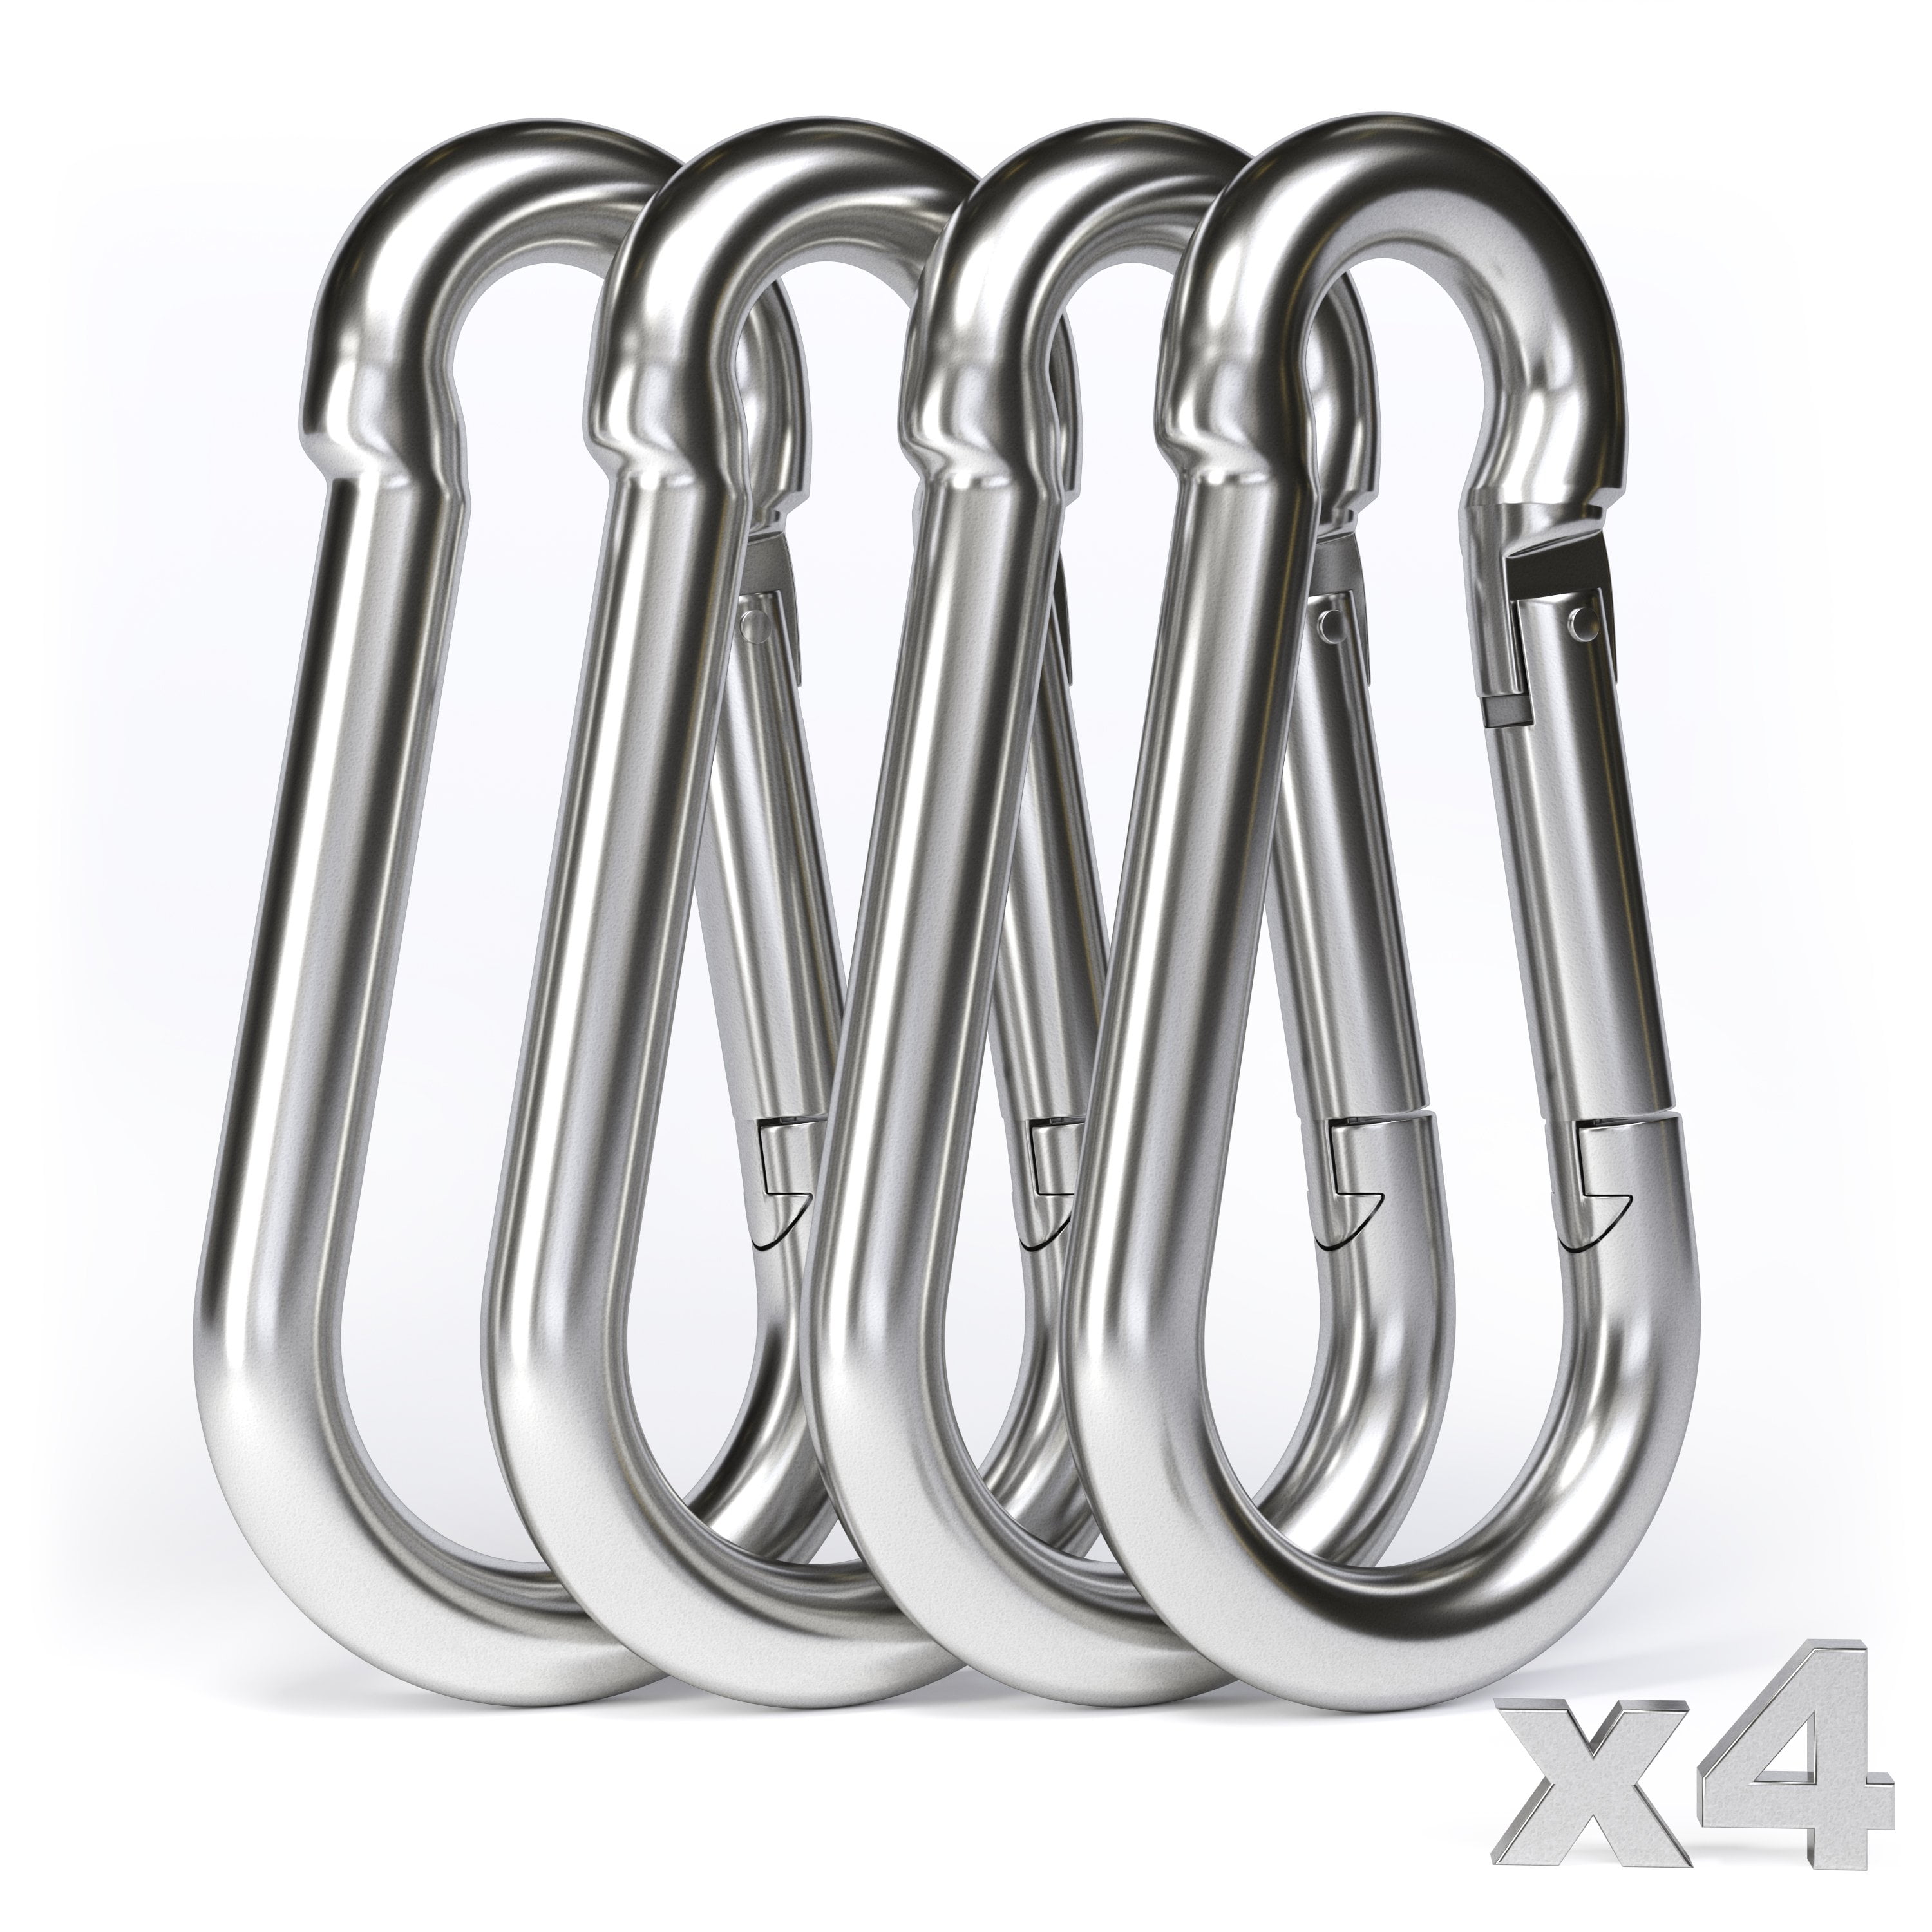 OWAYOTO Carabiner Clip Black Spring Snap Hook 3 Inch Steel Link Buckle Heavy Duty 8x80mm 4pcs for Hammock Swing Outdoor Camping Hiking 